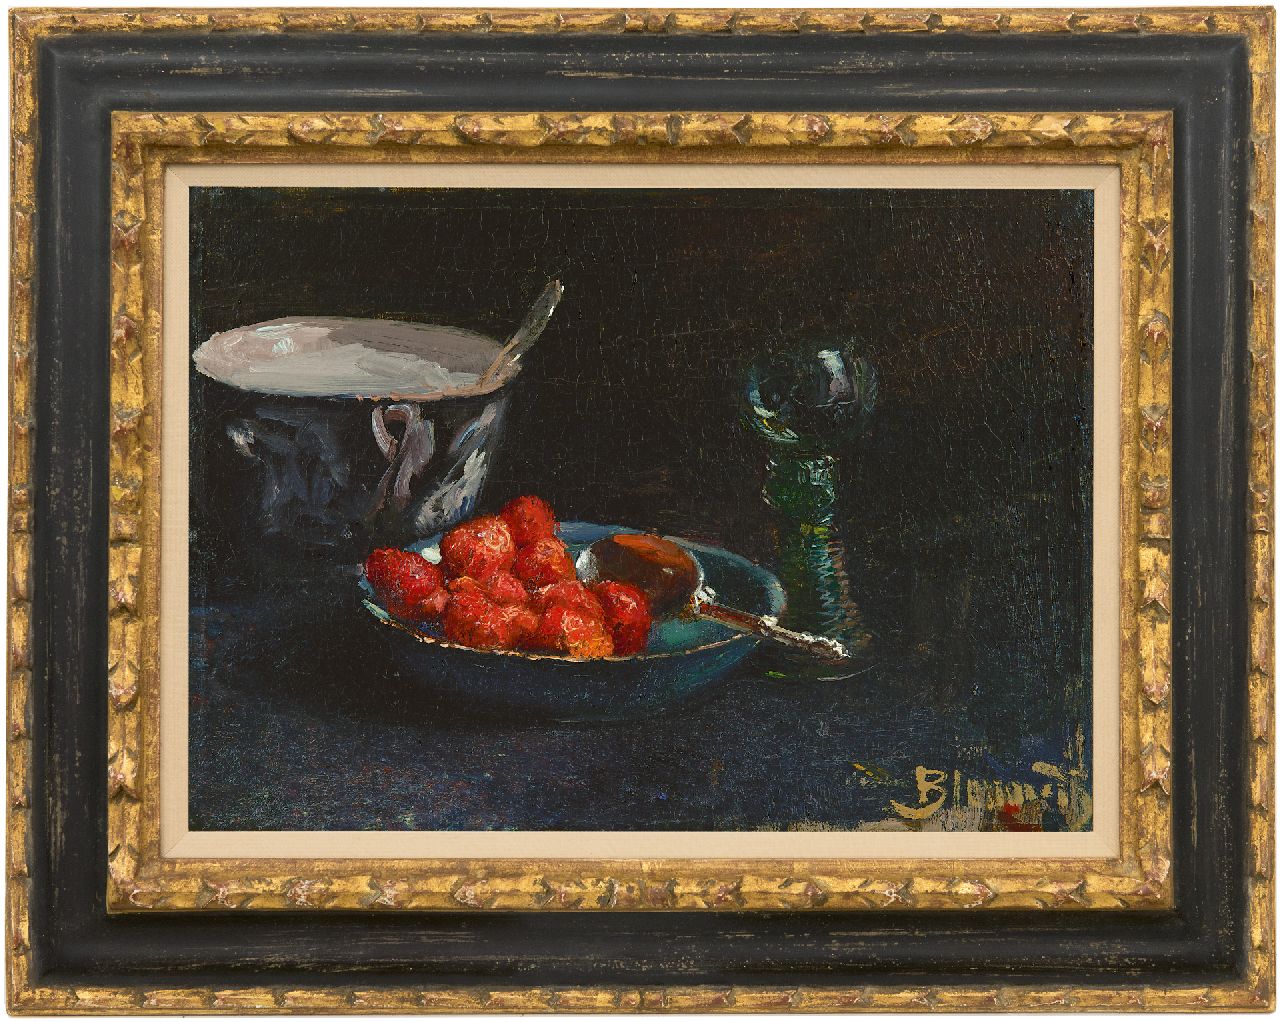 Blommers B.J.  | Bernardus Johannes 'Bernard' Blommers | Paintings offered for sale | Strawberries with whipped cream and a Rhine wine glass, oil on canvas 28.8 x 40.0 cm, signed l.r. and painted ca. 1880